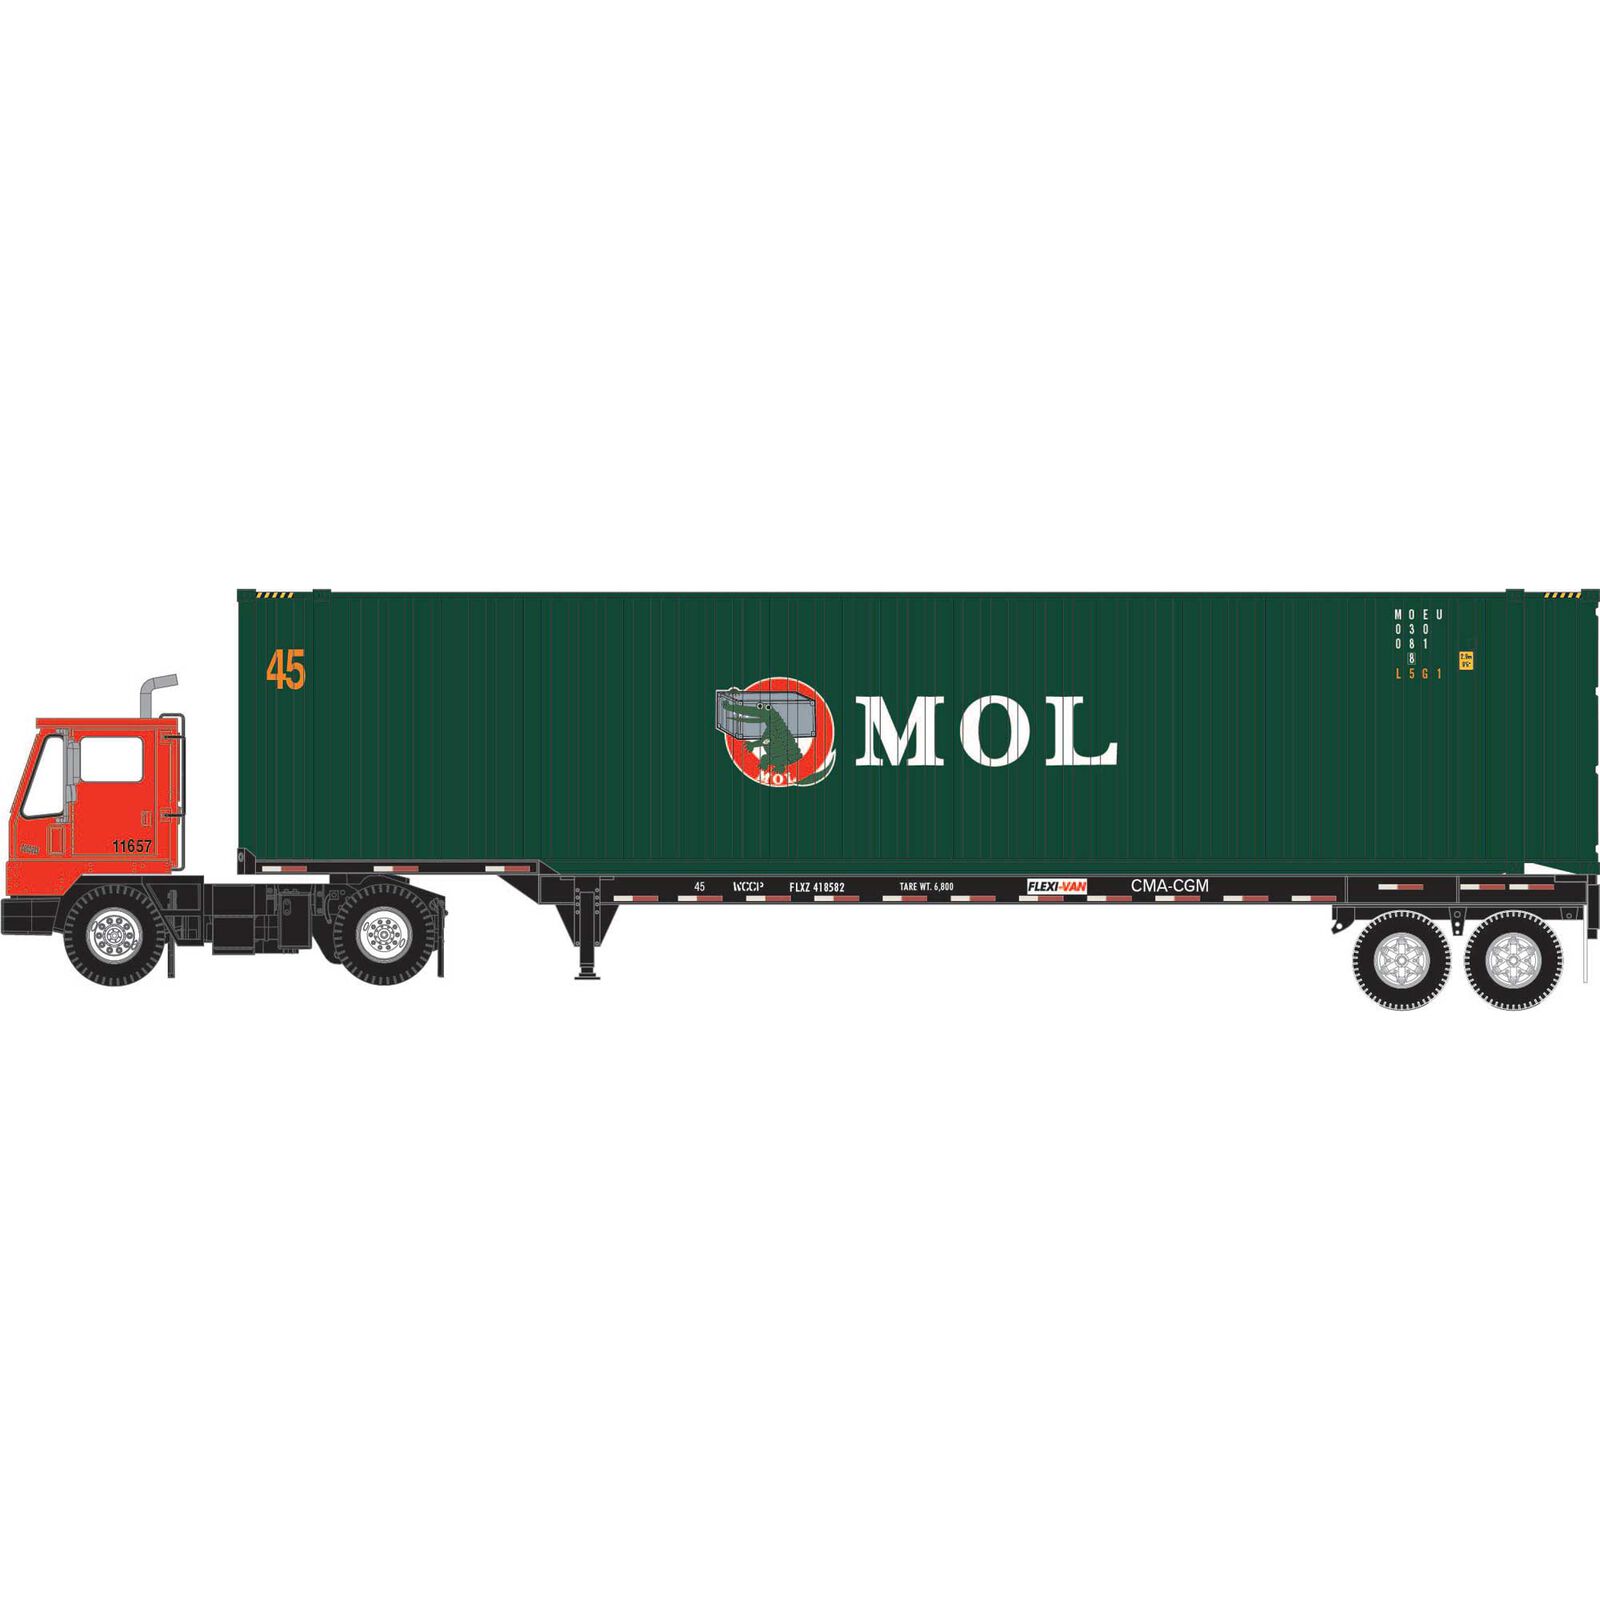 HO MOEU Set, 45' Container #030081 8/45' Chassis #418582/Yard Tractor #11657 (3)